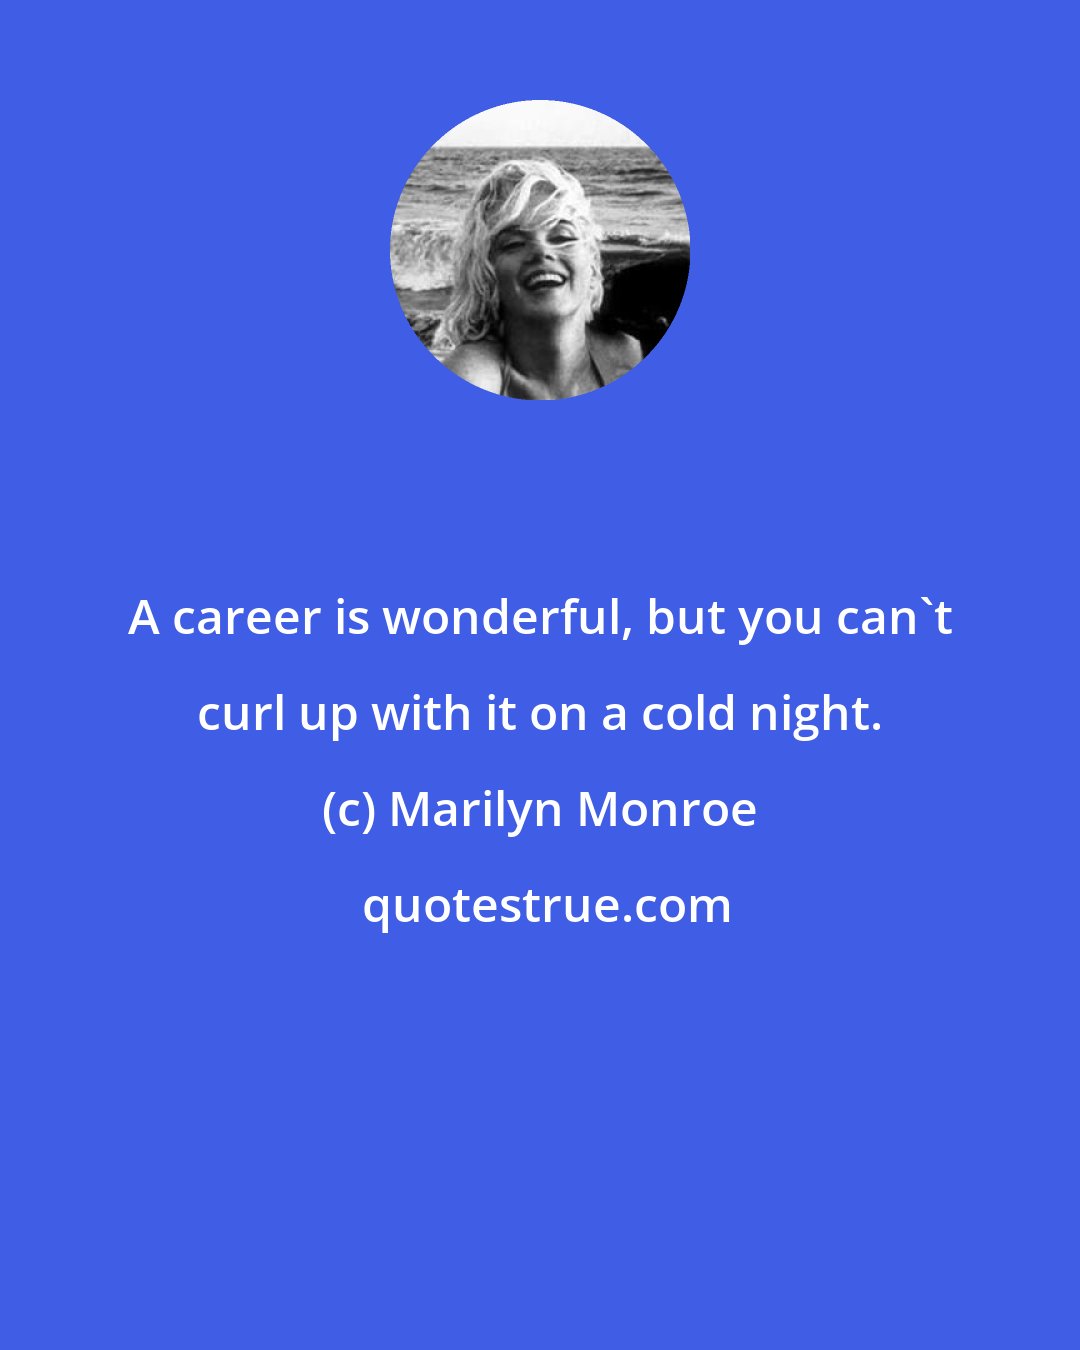 Marilyn Monroe: A career is wonderful, but you can't curl up with it on a cold night.